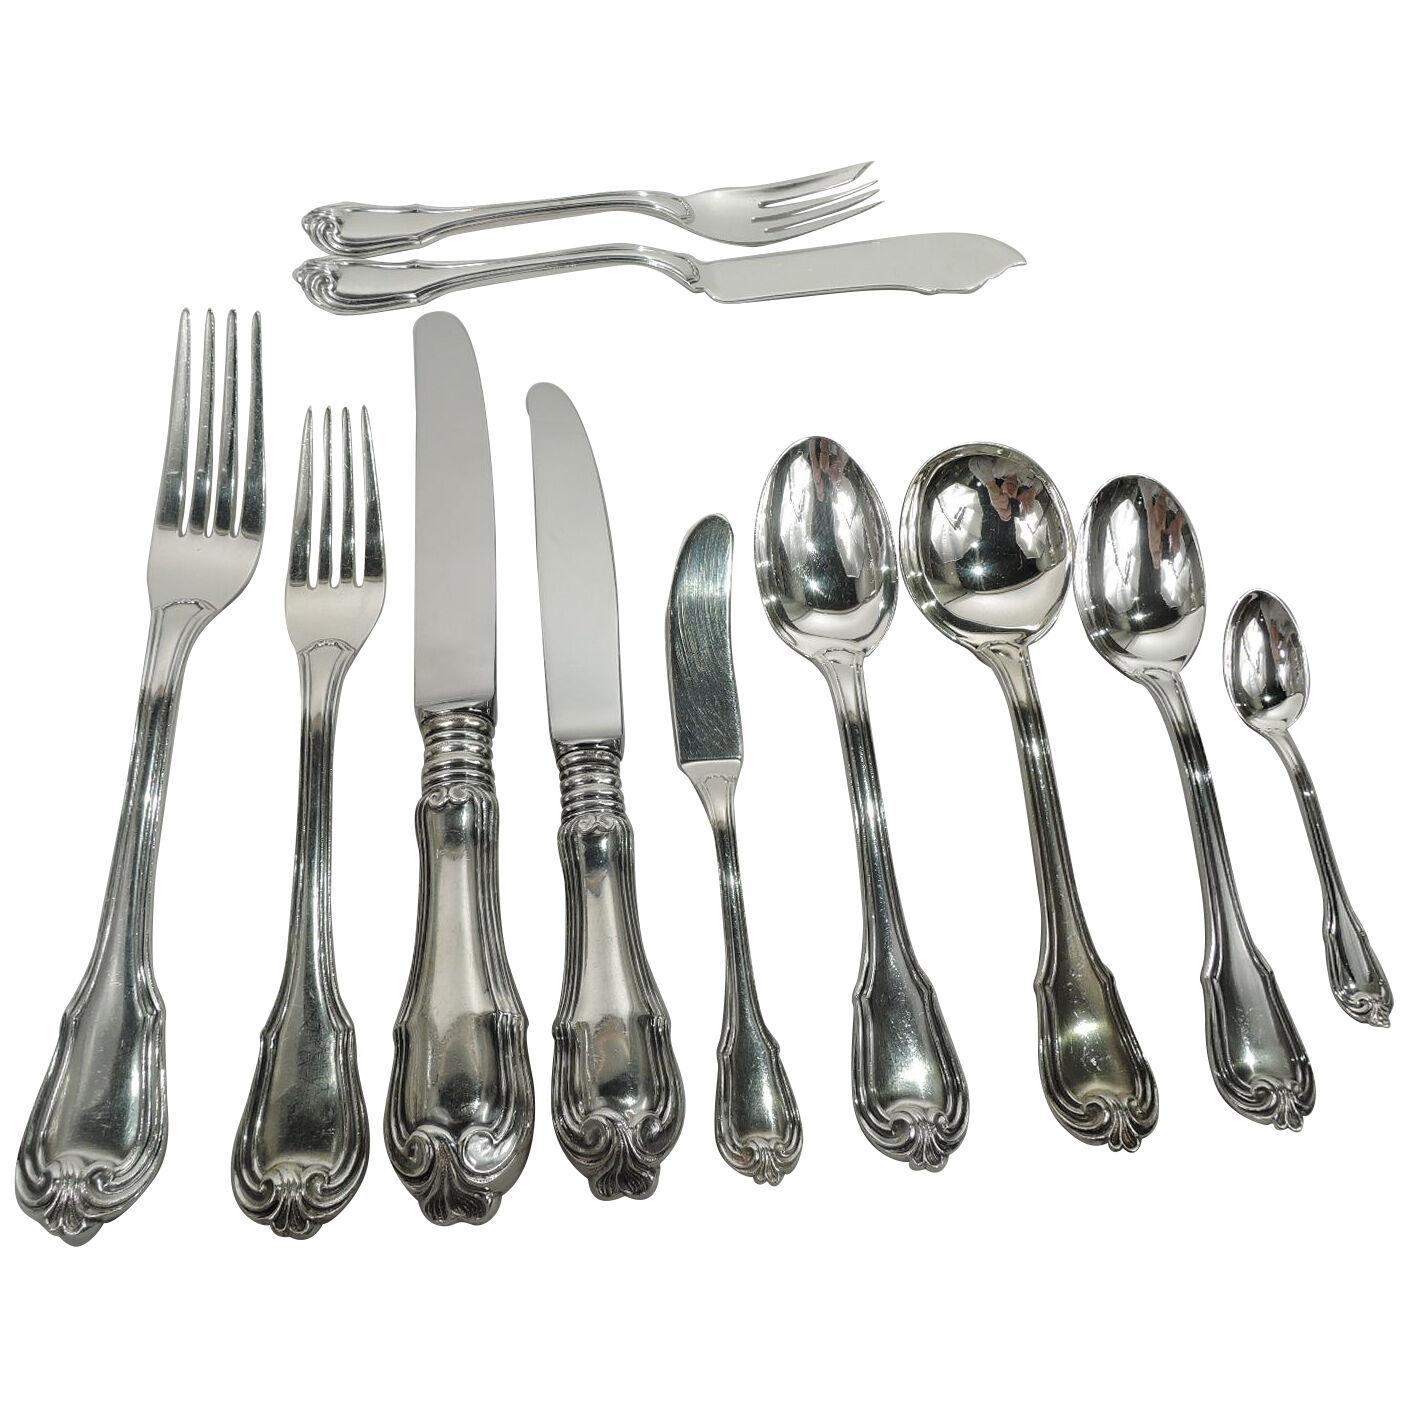 Buccellati Borgia Dinner and Lunch Set for 16 with 176 Pieces